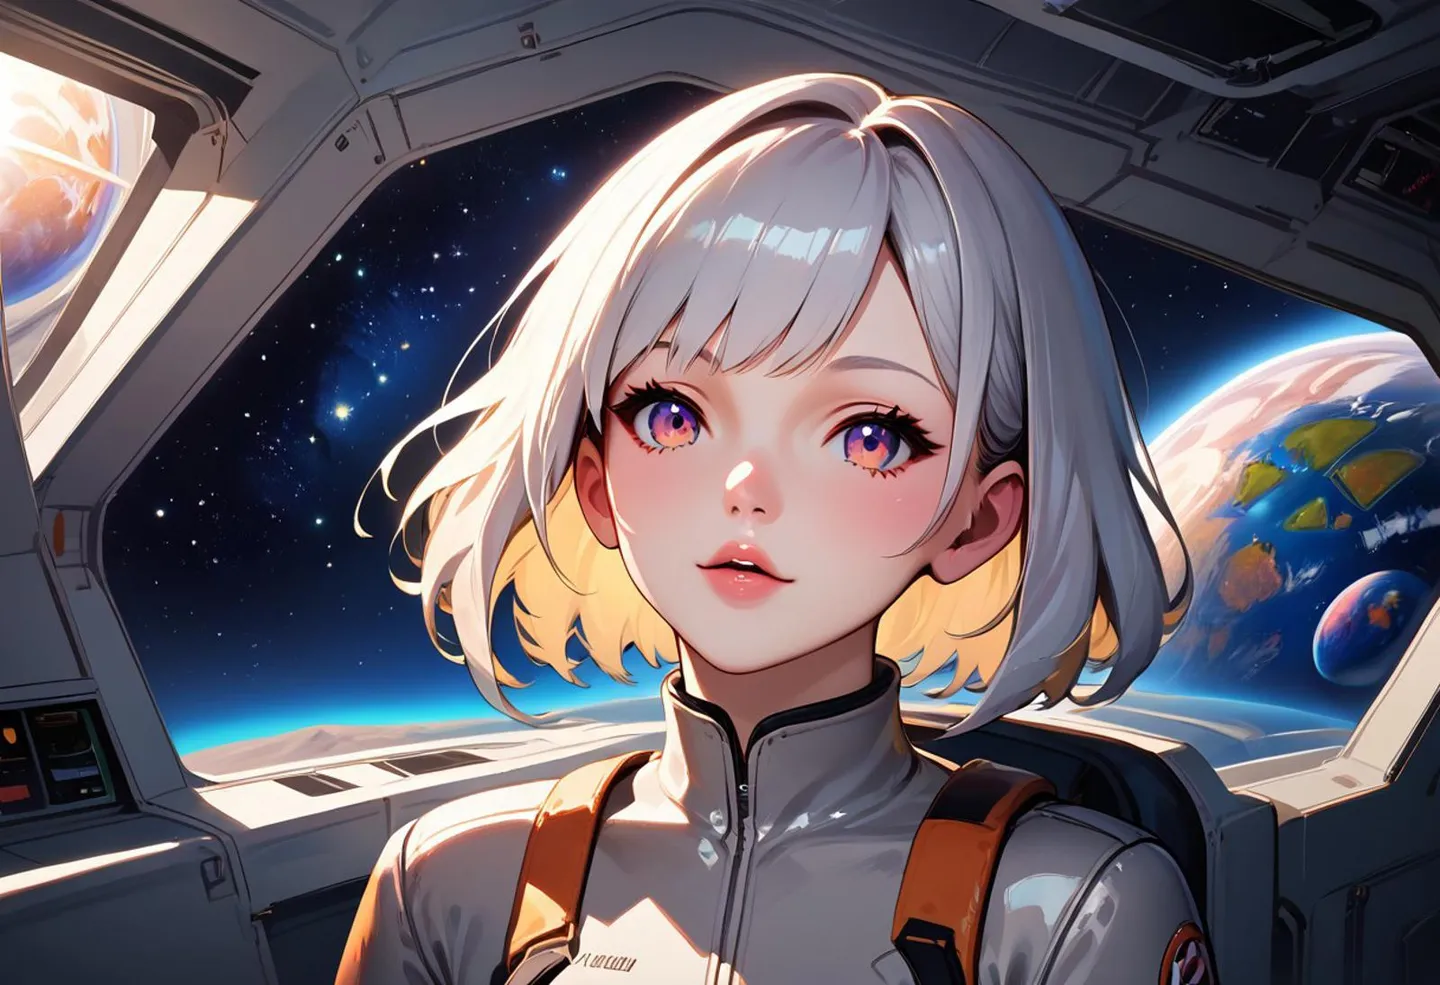 AI generated image of an anime girl with silver hair and detailed eyes, wearing a futuristic space suit, standing inside a spaceship with a view of planets and stars outside the window. Created using Stable Diffusion.